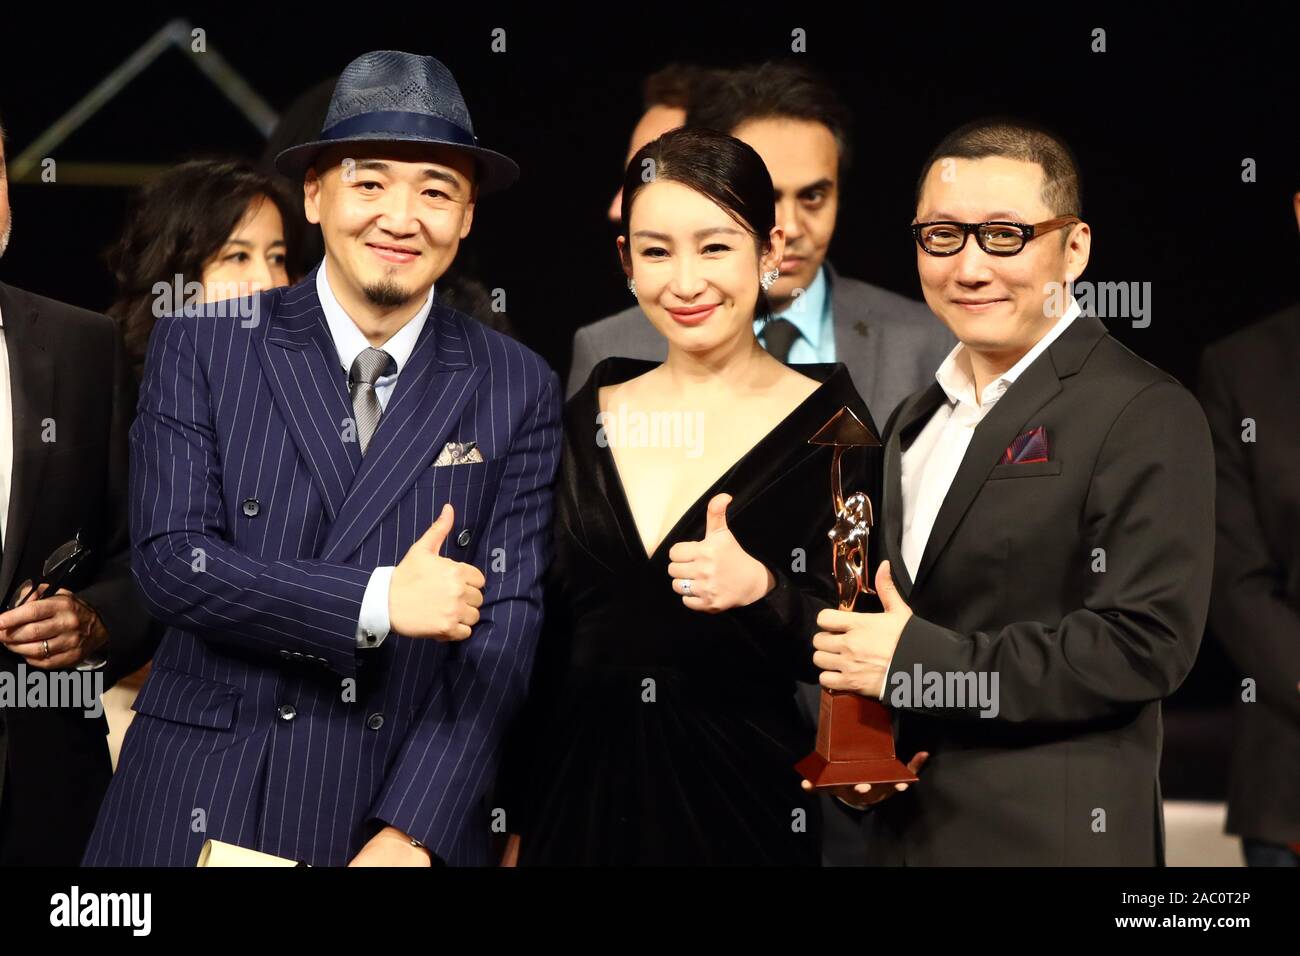 Cairo, Egypt. 29th Nov, 2019. Director Zhang Chong (L) and Zhang Bo (R) of Chinese movie 'The Fourth Wall' and Chinese actress Qin Hailu, who is a member of the international jury, pose for a photo during the awarding ceremony of Cairo International Film Festival in Cairo, Egypt, on Nov. 29, 2019. The 41st edition of Egypt's Cairo International Film Festival (CIFF) concluded Friday night at Cairo Opera House with China's movie 'The Fourth Wall' winning an award at the official film section competition. Credit: Ahmed Gomaa/Xinhua/Alamy Live News Stock Photo